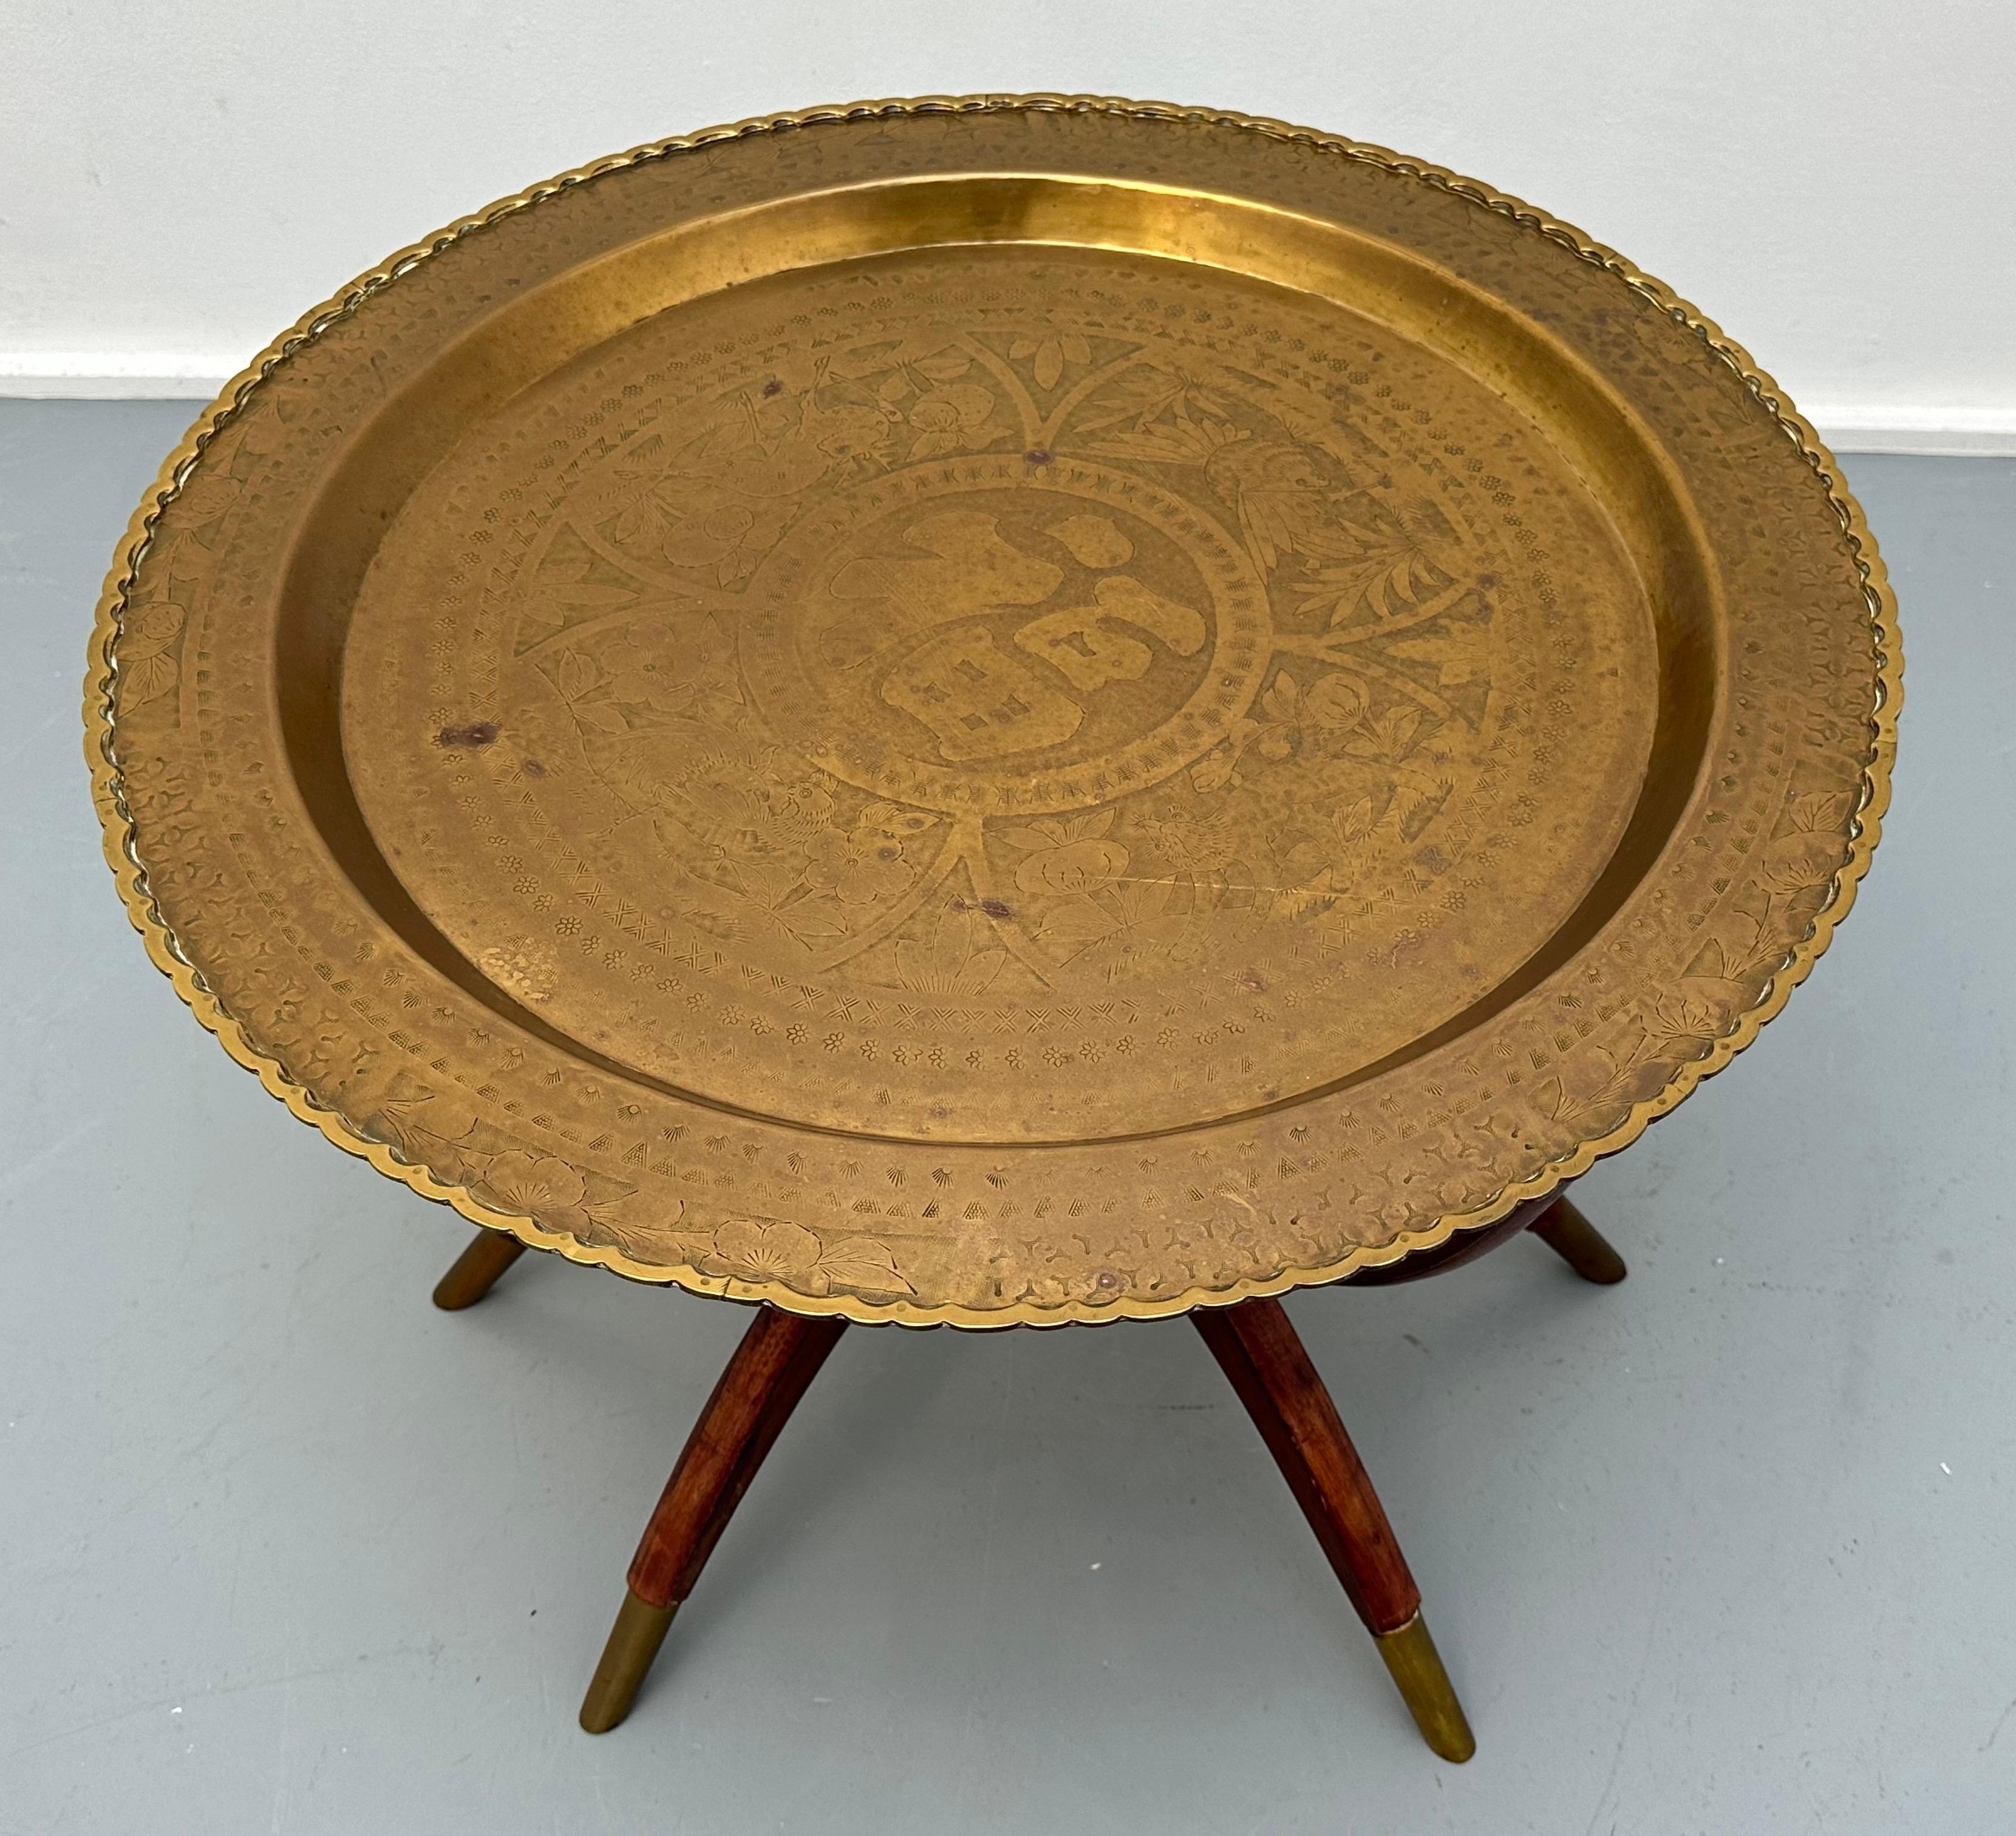 1960s coffee or side table which is perfect for serving afternoon coffee or tea because of its height. Made in Hong Kong which is stamped on the back of the brass circular removable tray table top. The six stained dark red wooden spider-leg